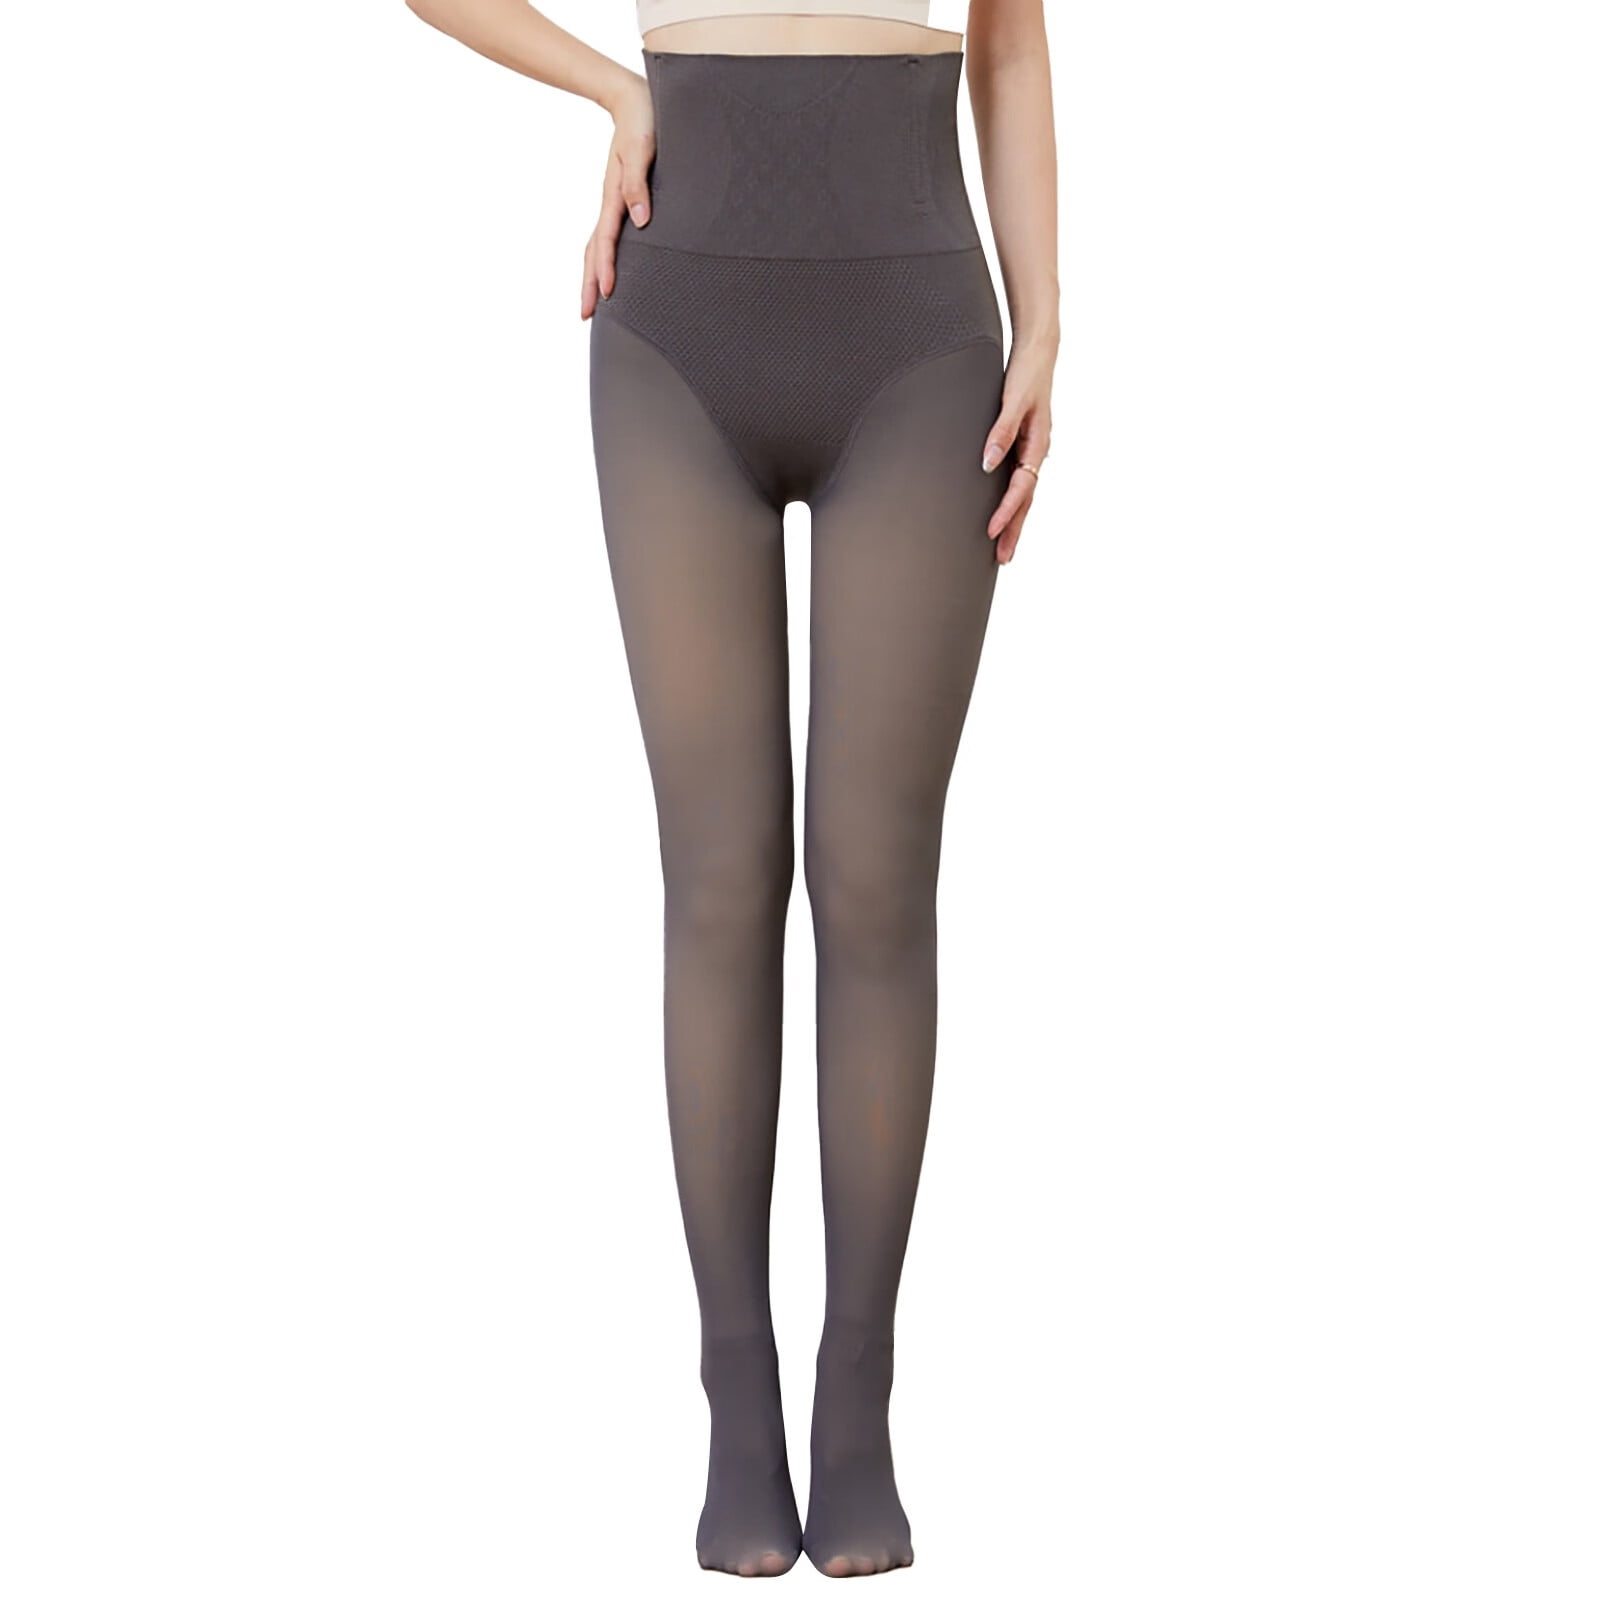 High Waisted Fleece Yoga Velvet Plush Leggings Primark In Candy Colors For  Autumn And Winter Warm Pantyhose Outfit Pant3034470 From Fmx8, $16.6